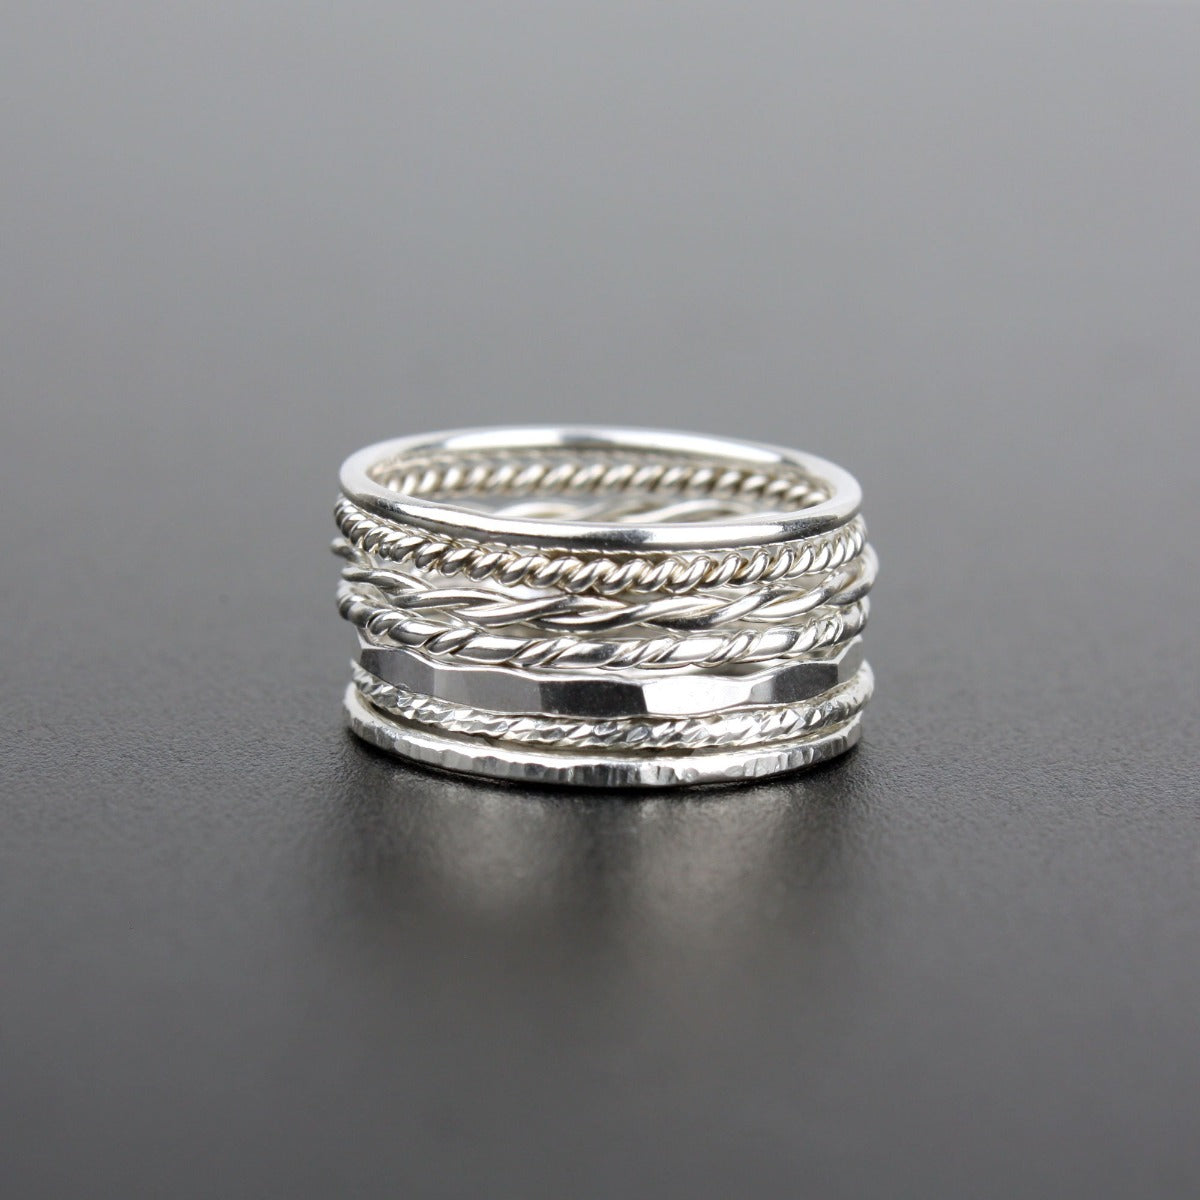 Set of 7 Mixed Textures Stacking Rings 7